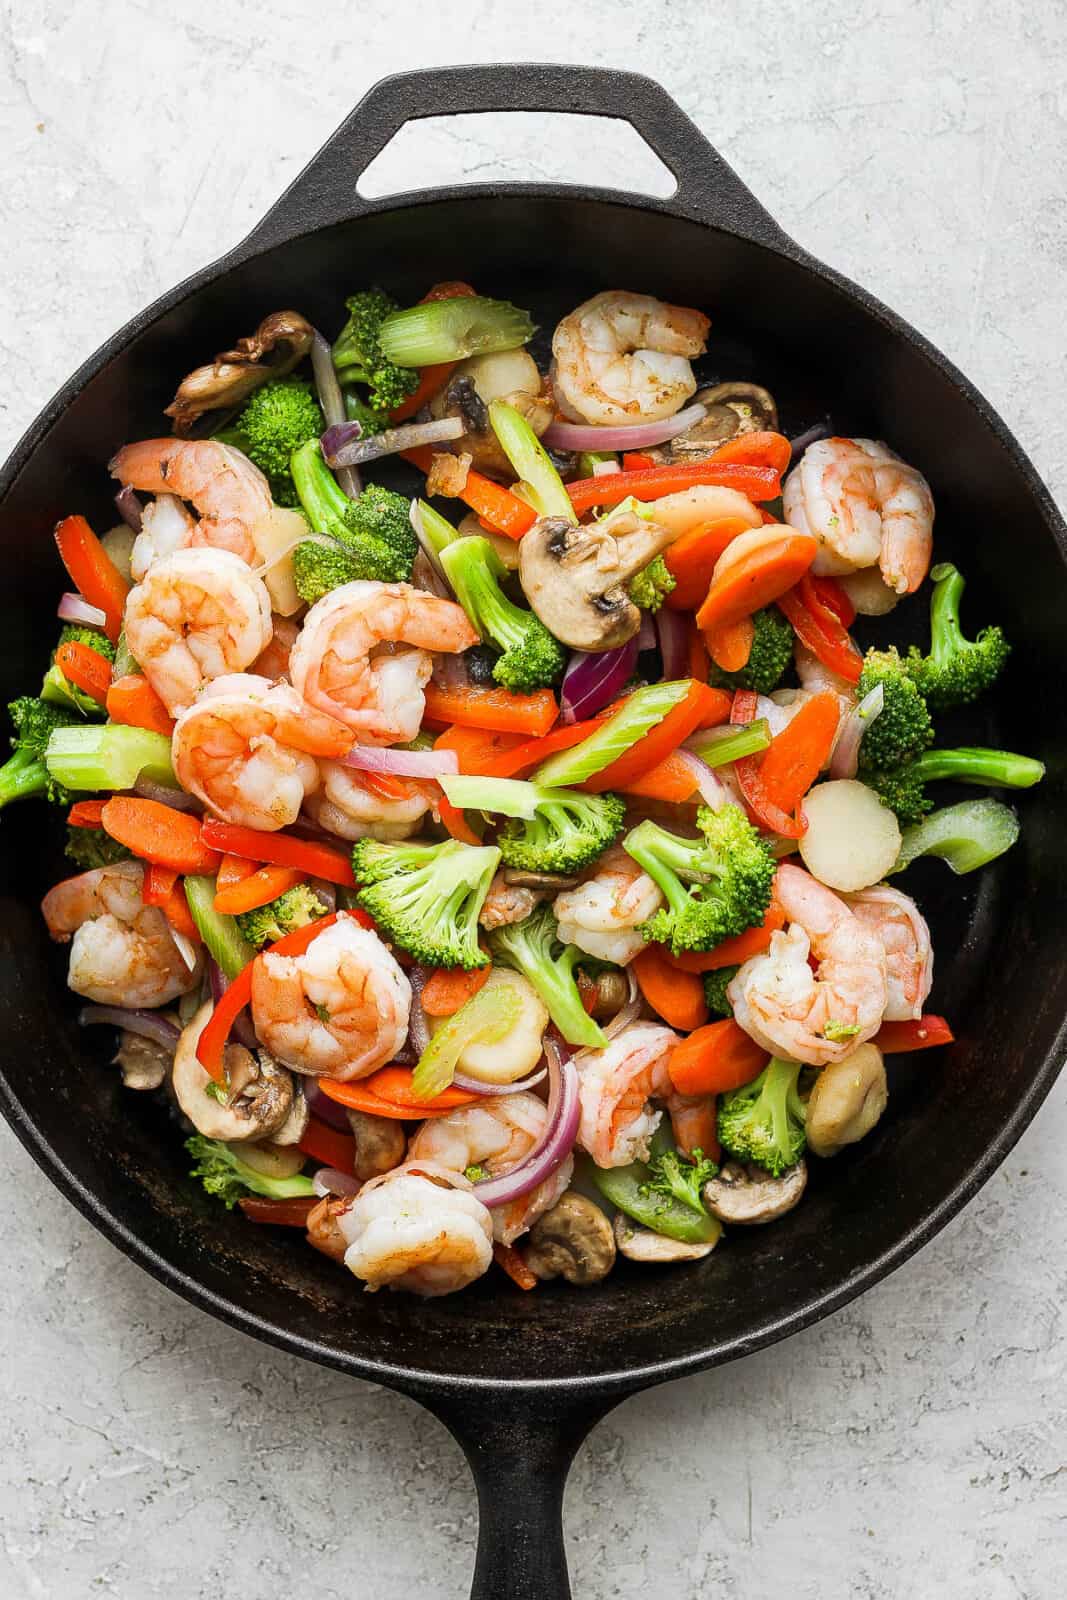 Shrimp stir fry in a cast iron skillet before adding the sauce.